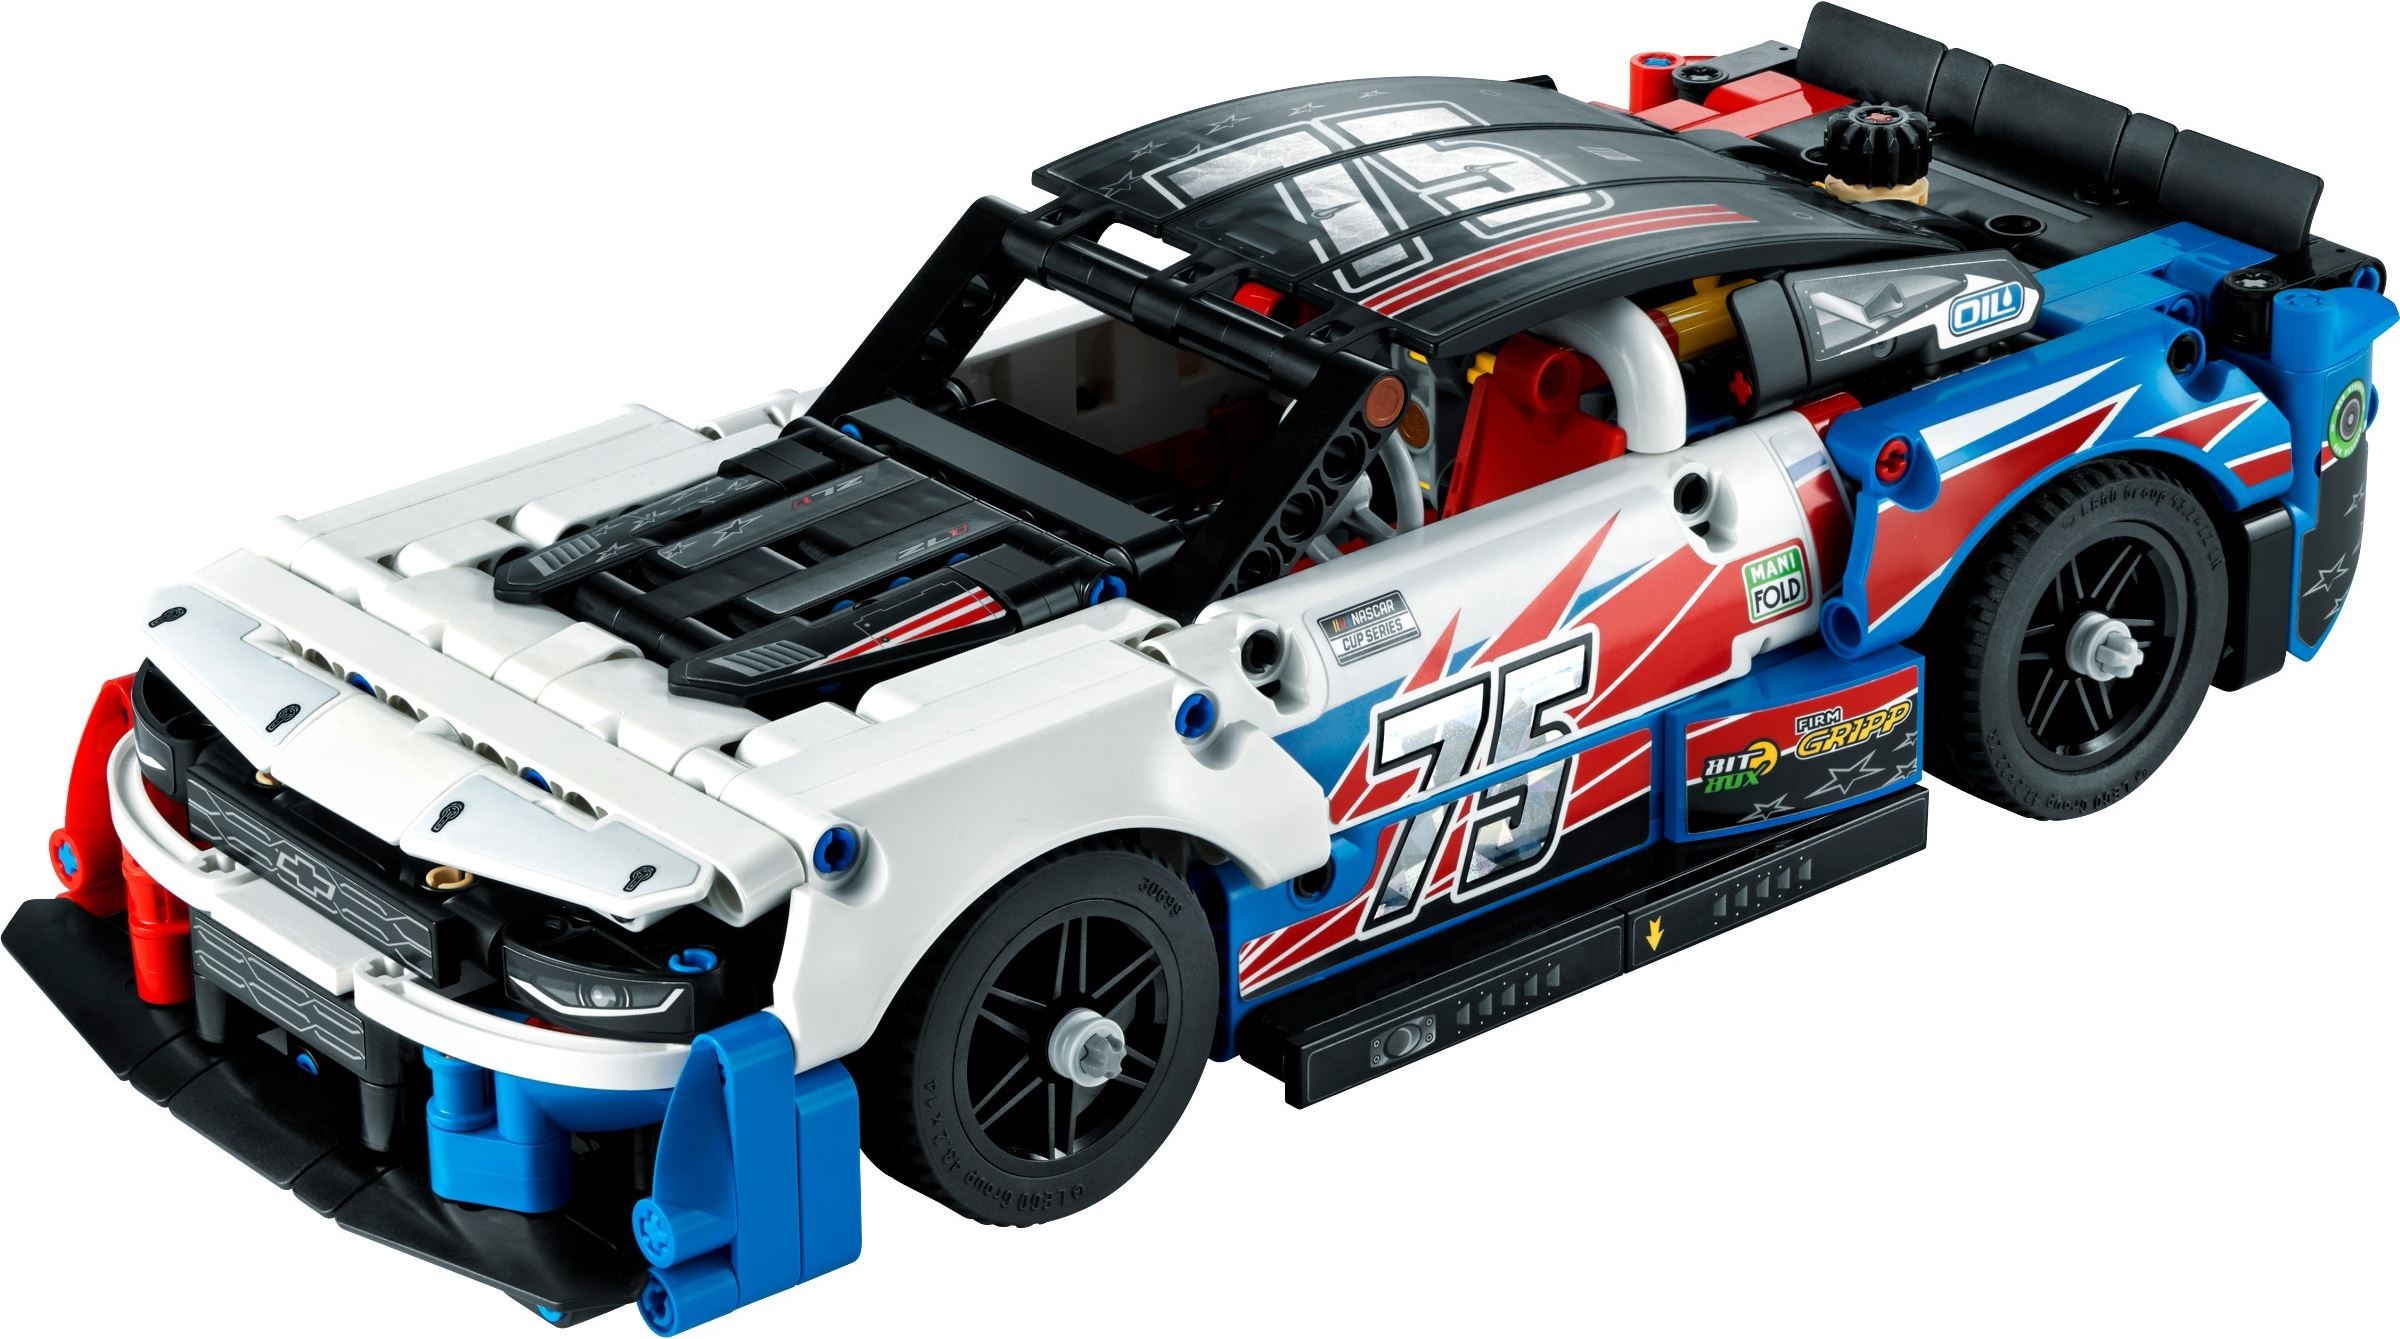 Lego (R) Technic new product information